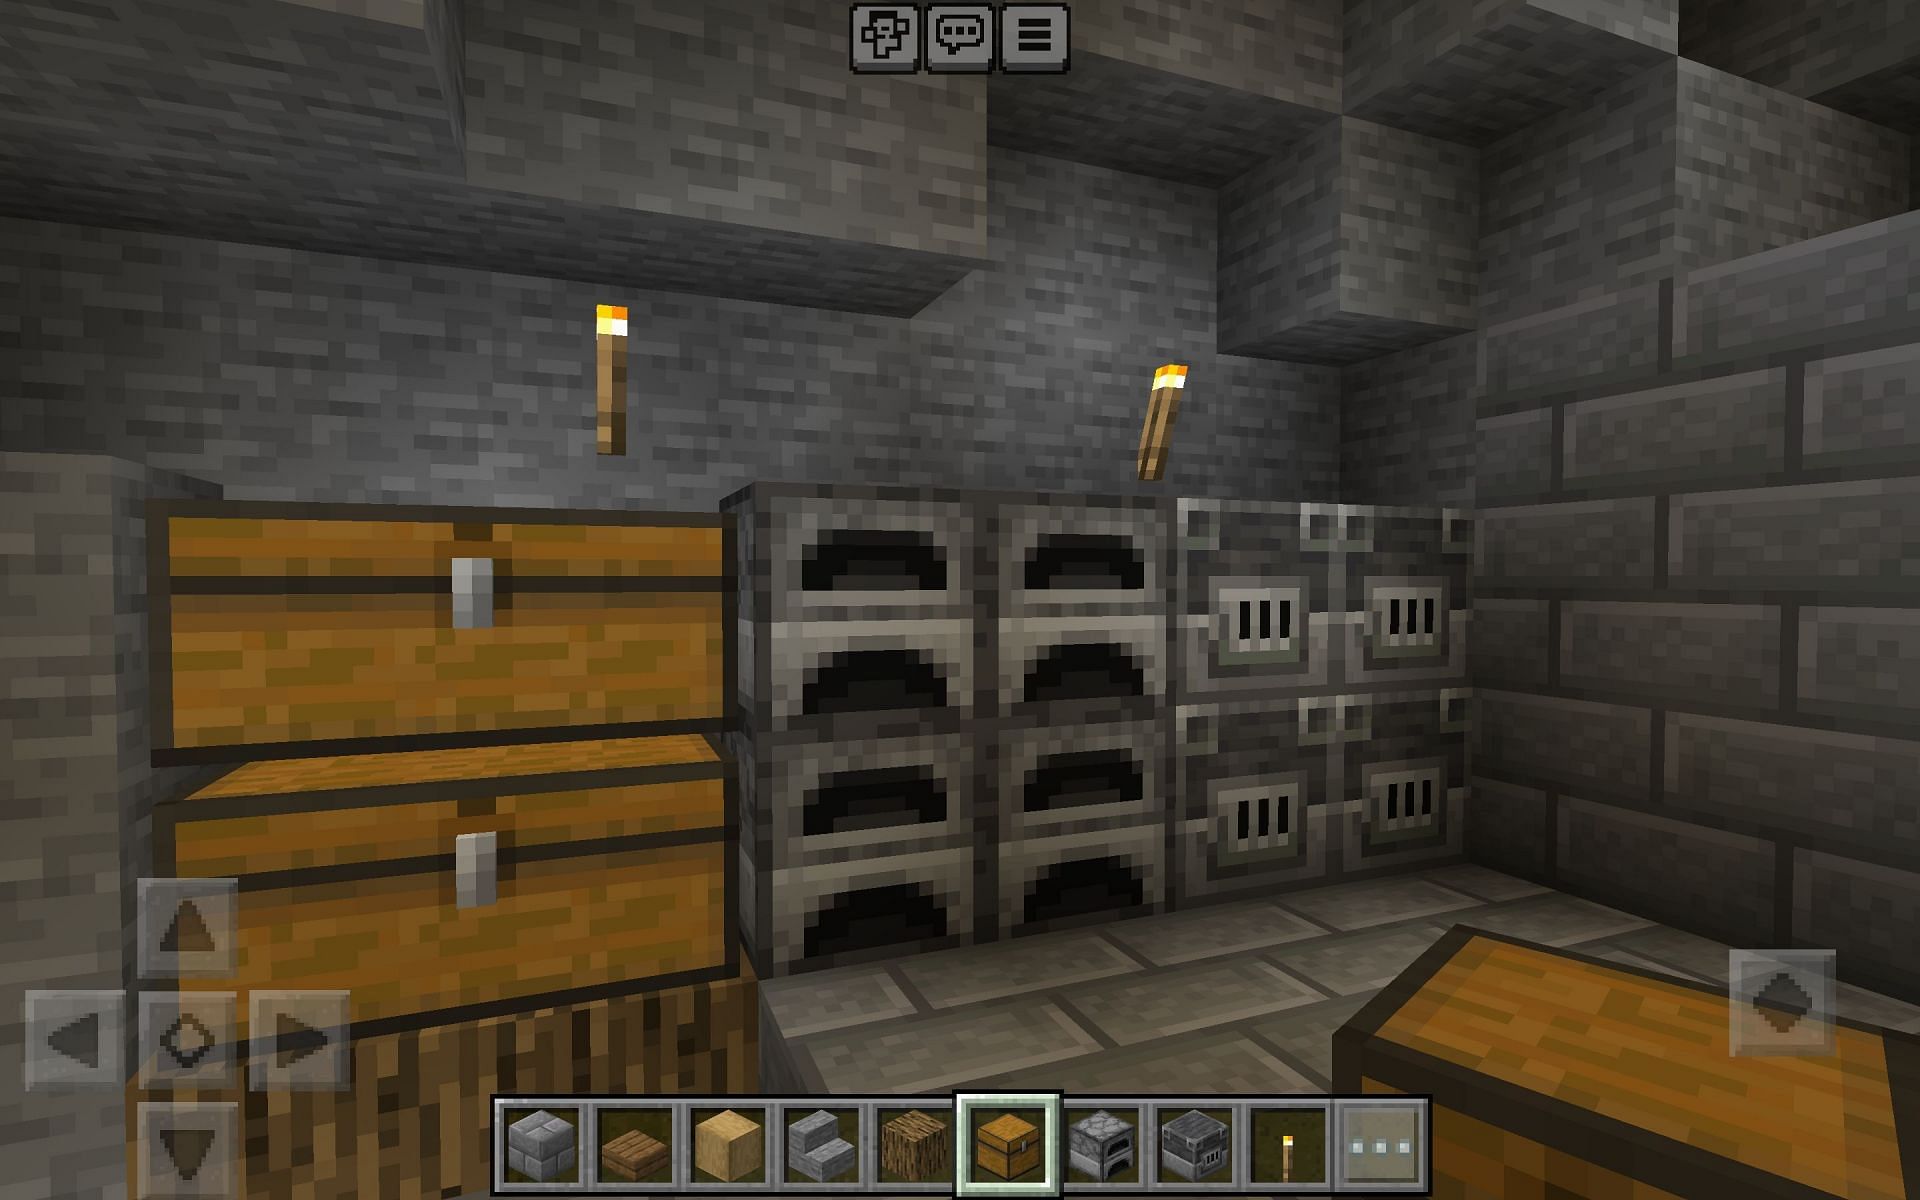 Stacking up could save space in a cave house (image via Mojang Studios)